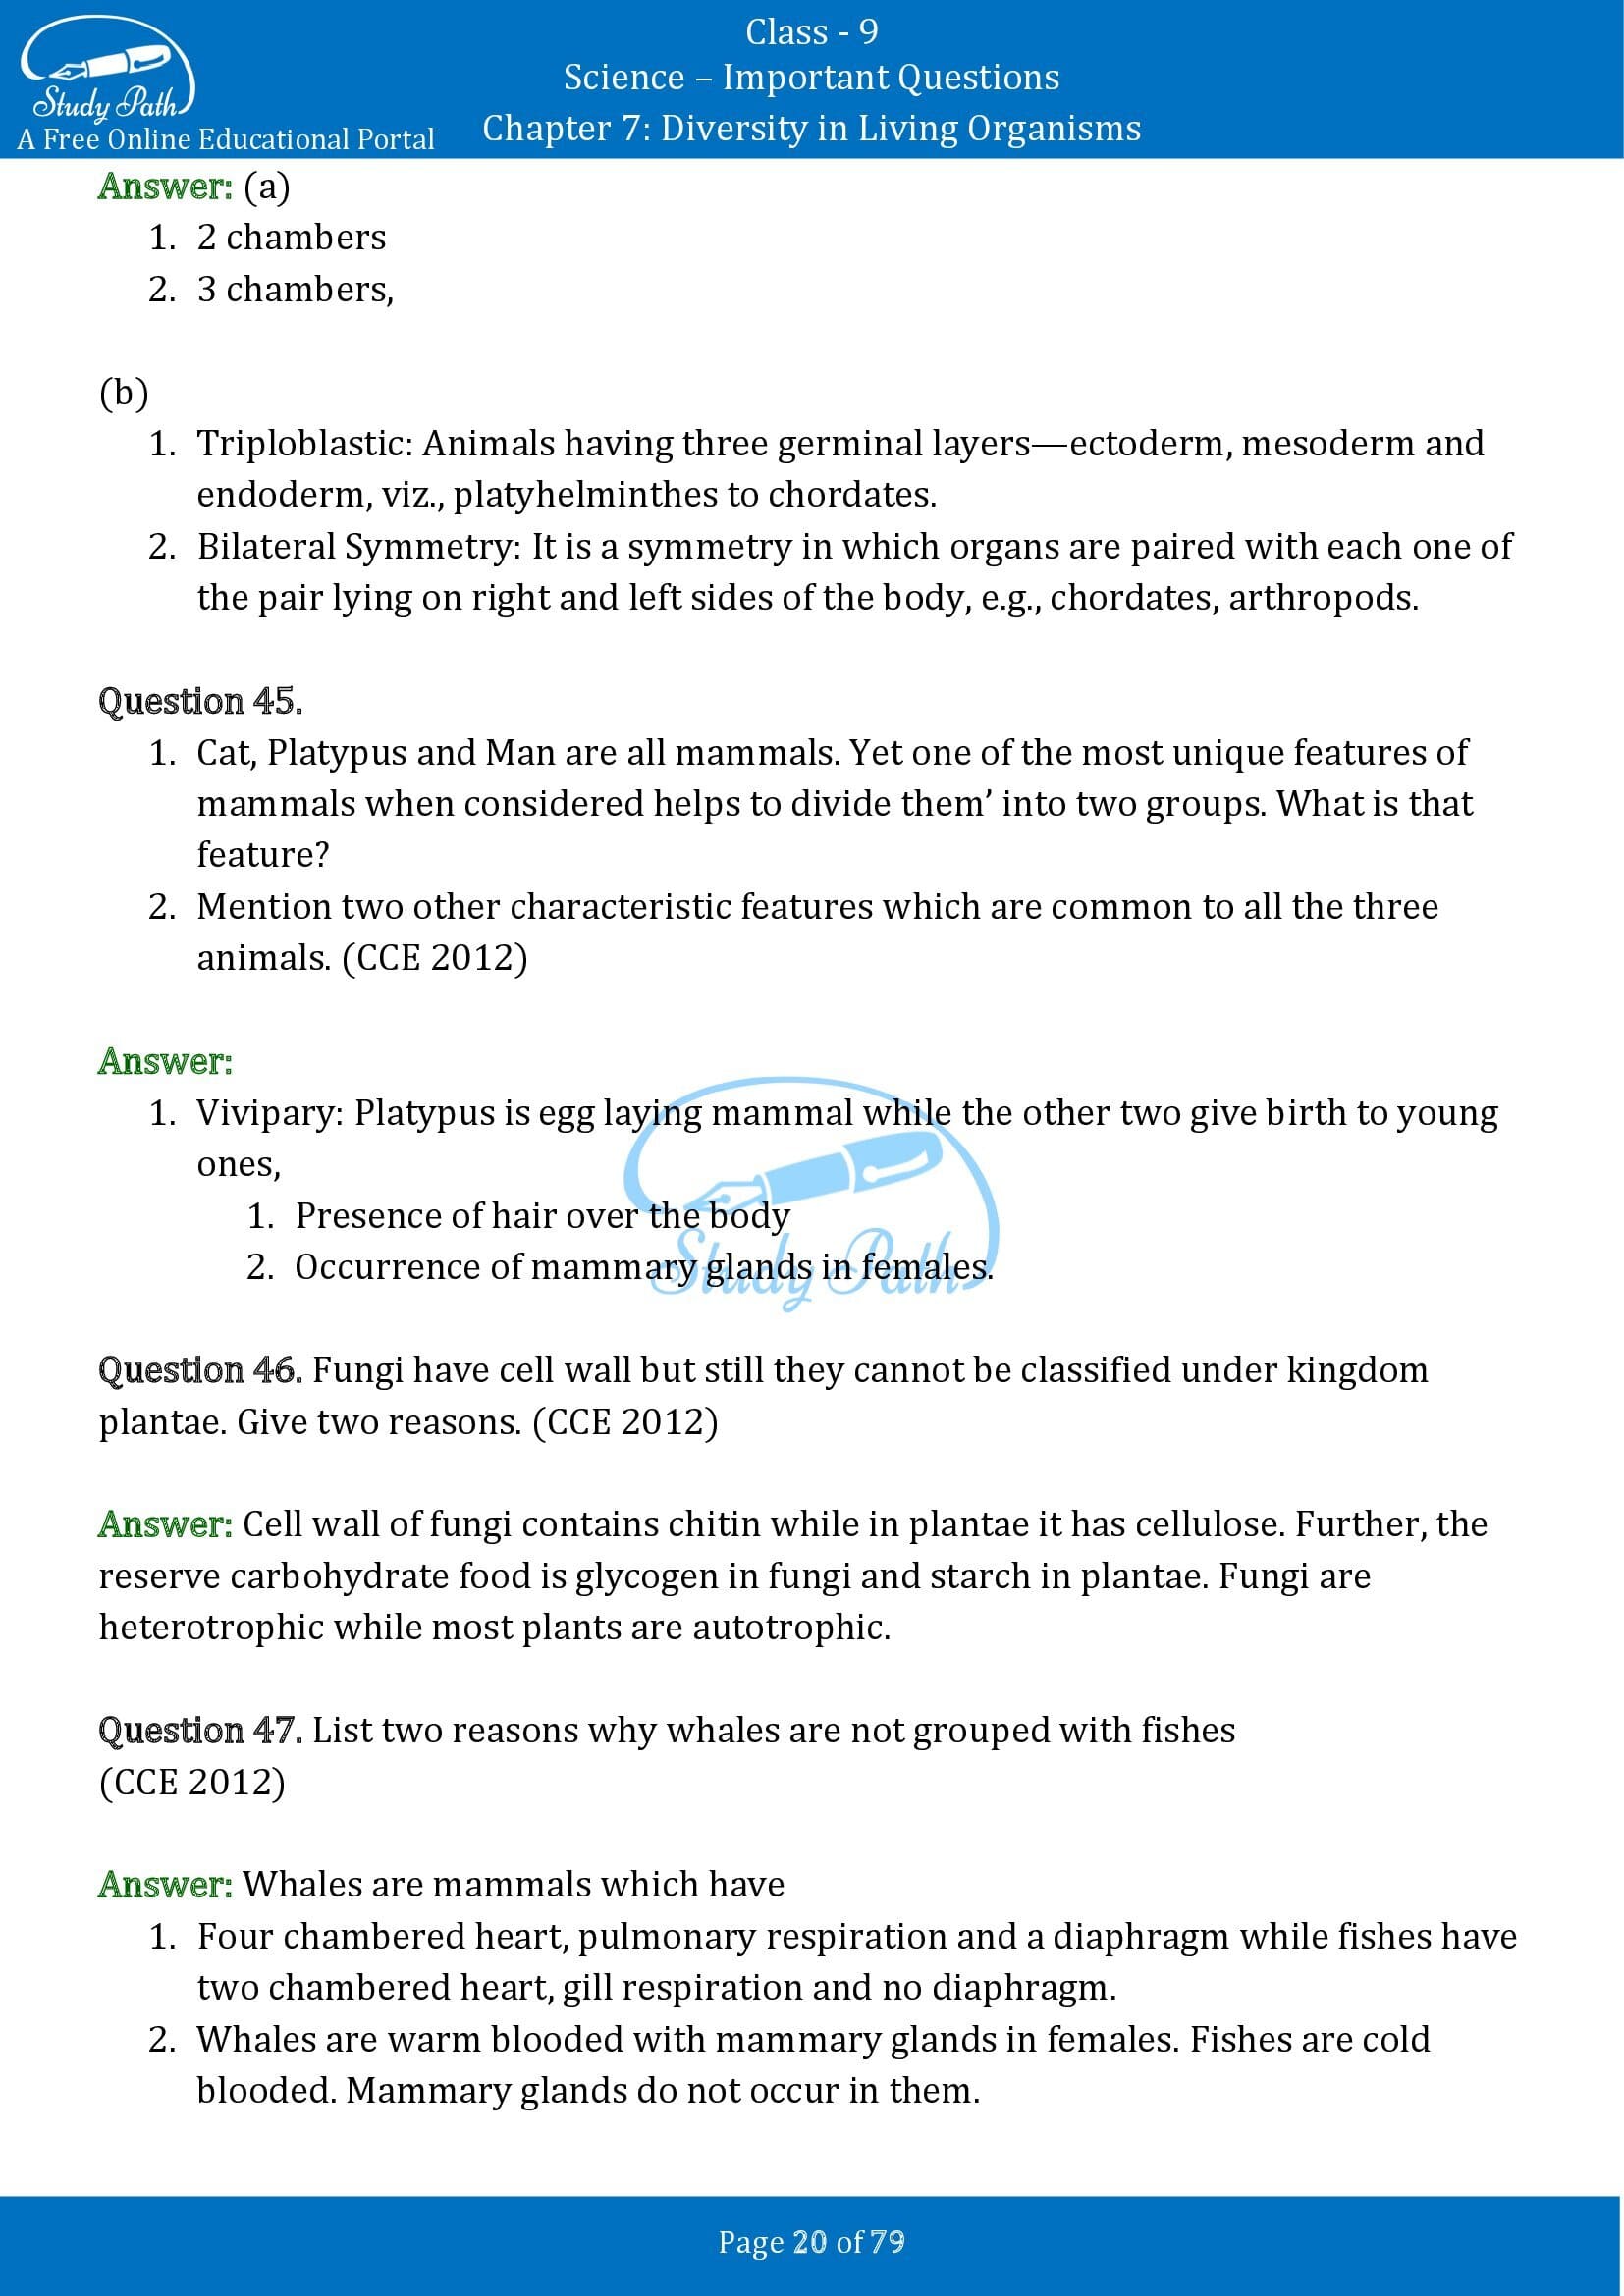 Important Questions for Class 9 Science Chapter 7 Diversity in Living Organisms 00020